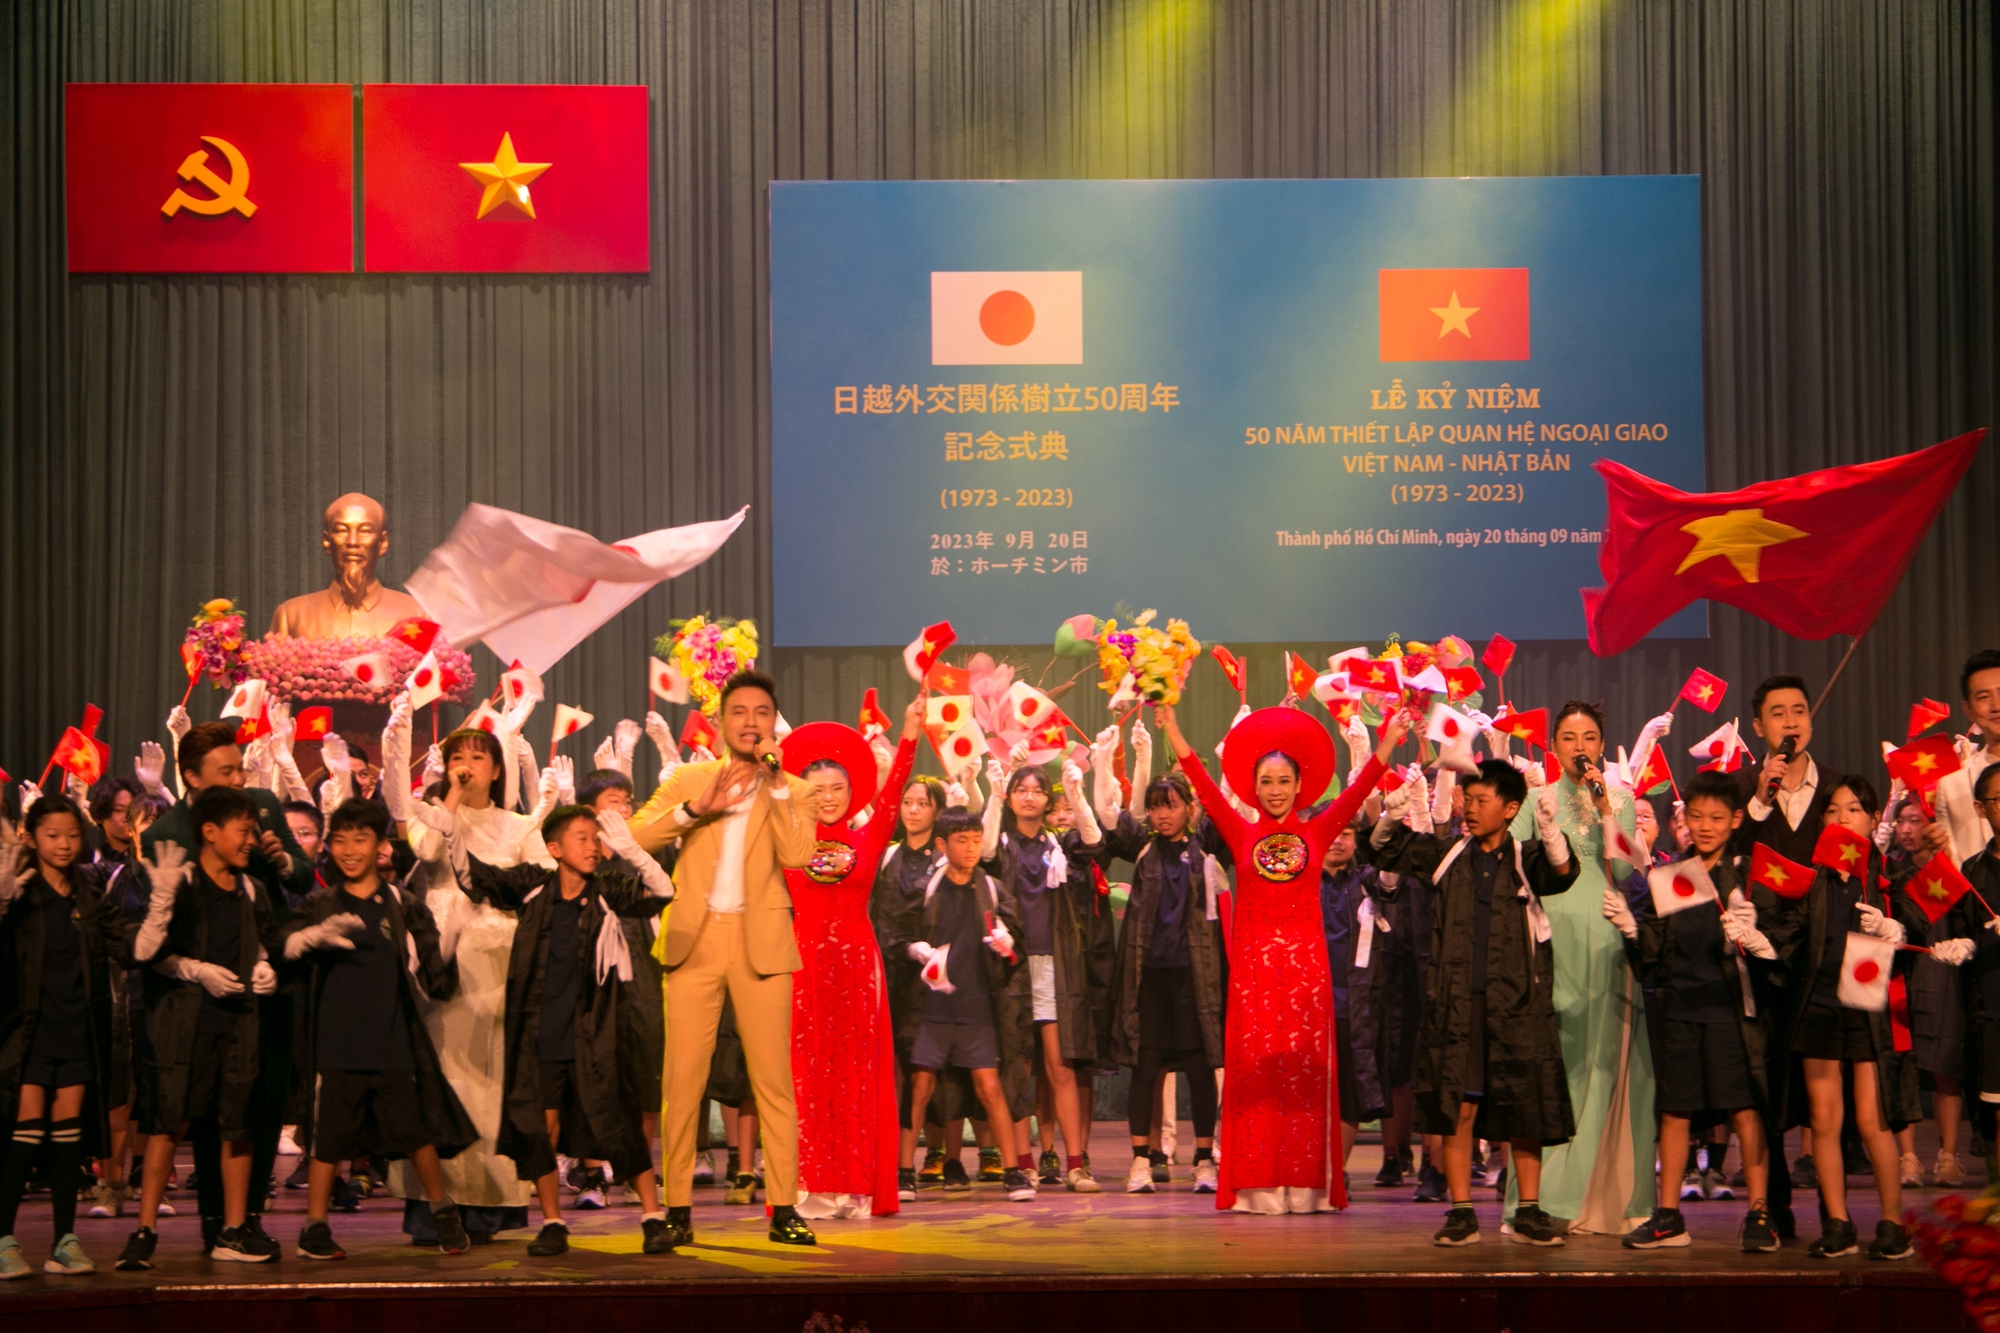 Ho Chi Minh City celebrates 50 years since the establishment of diplomatic relations between Vietnam and Japan - Photo 10.